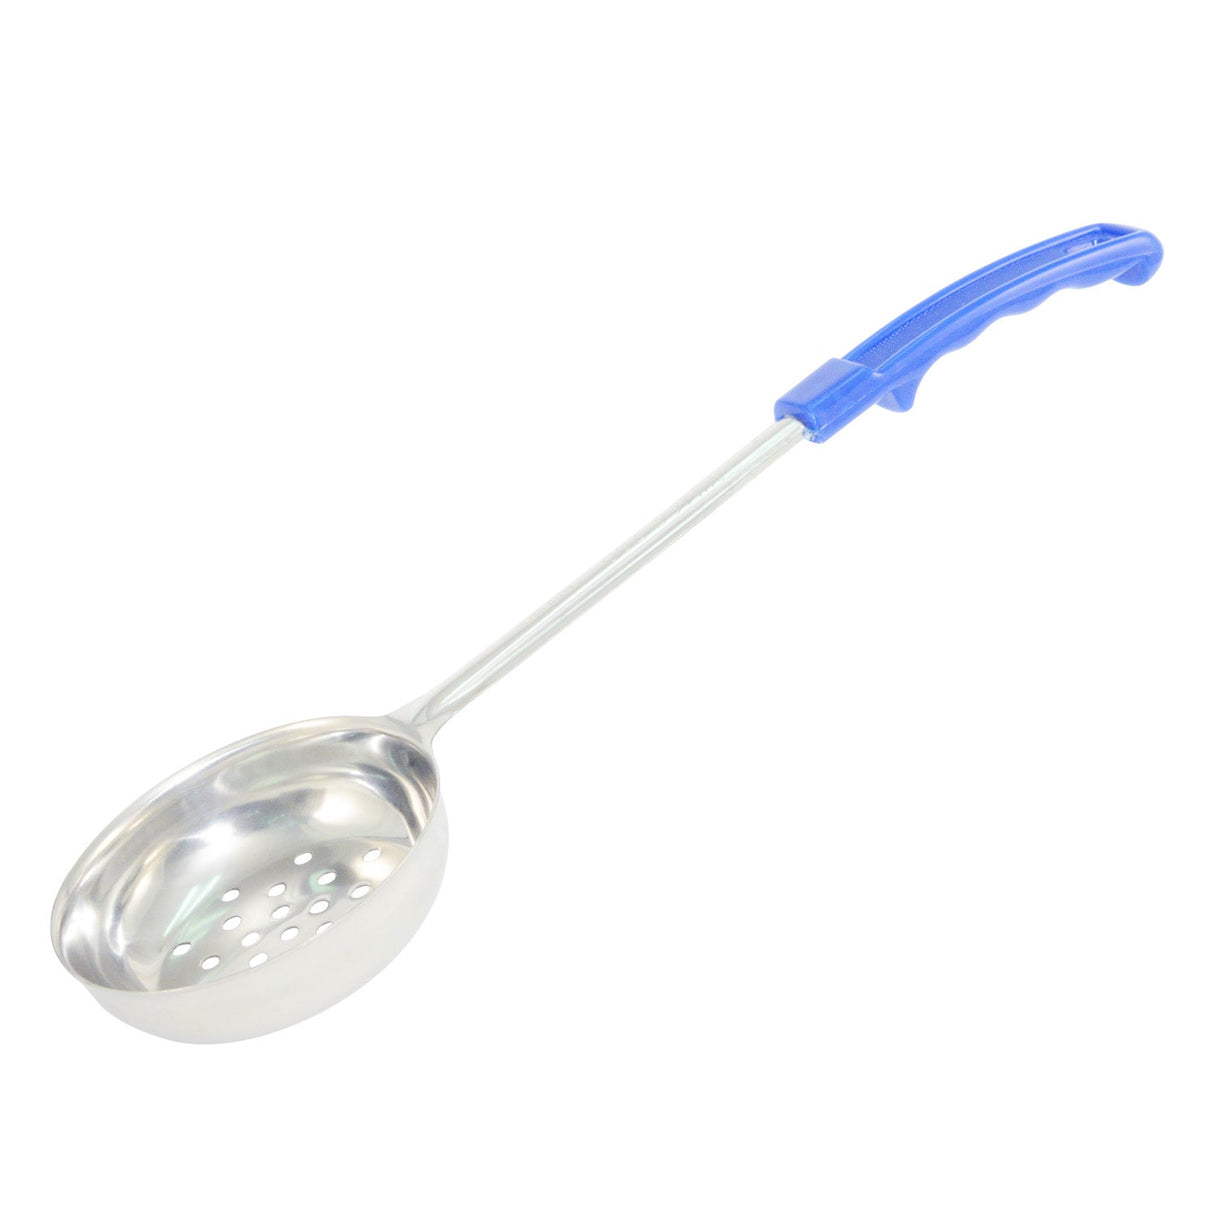 Portion Spoon SS Perf. W/ Blue Hdl 8oz